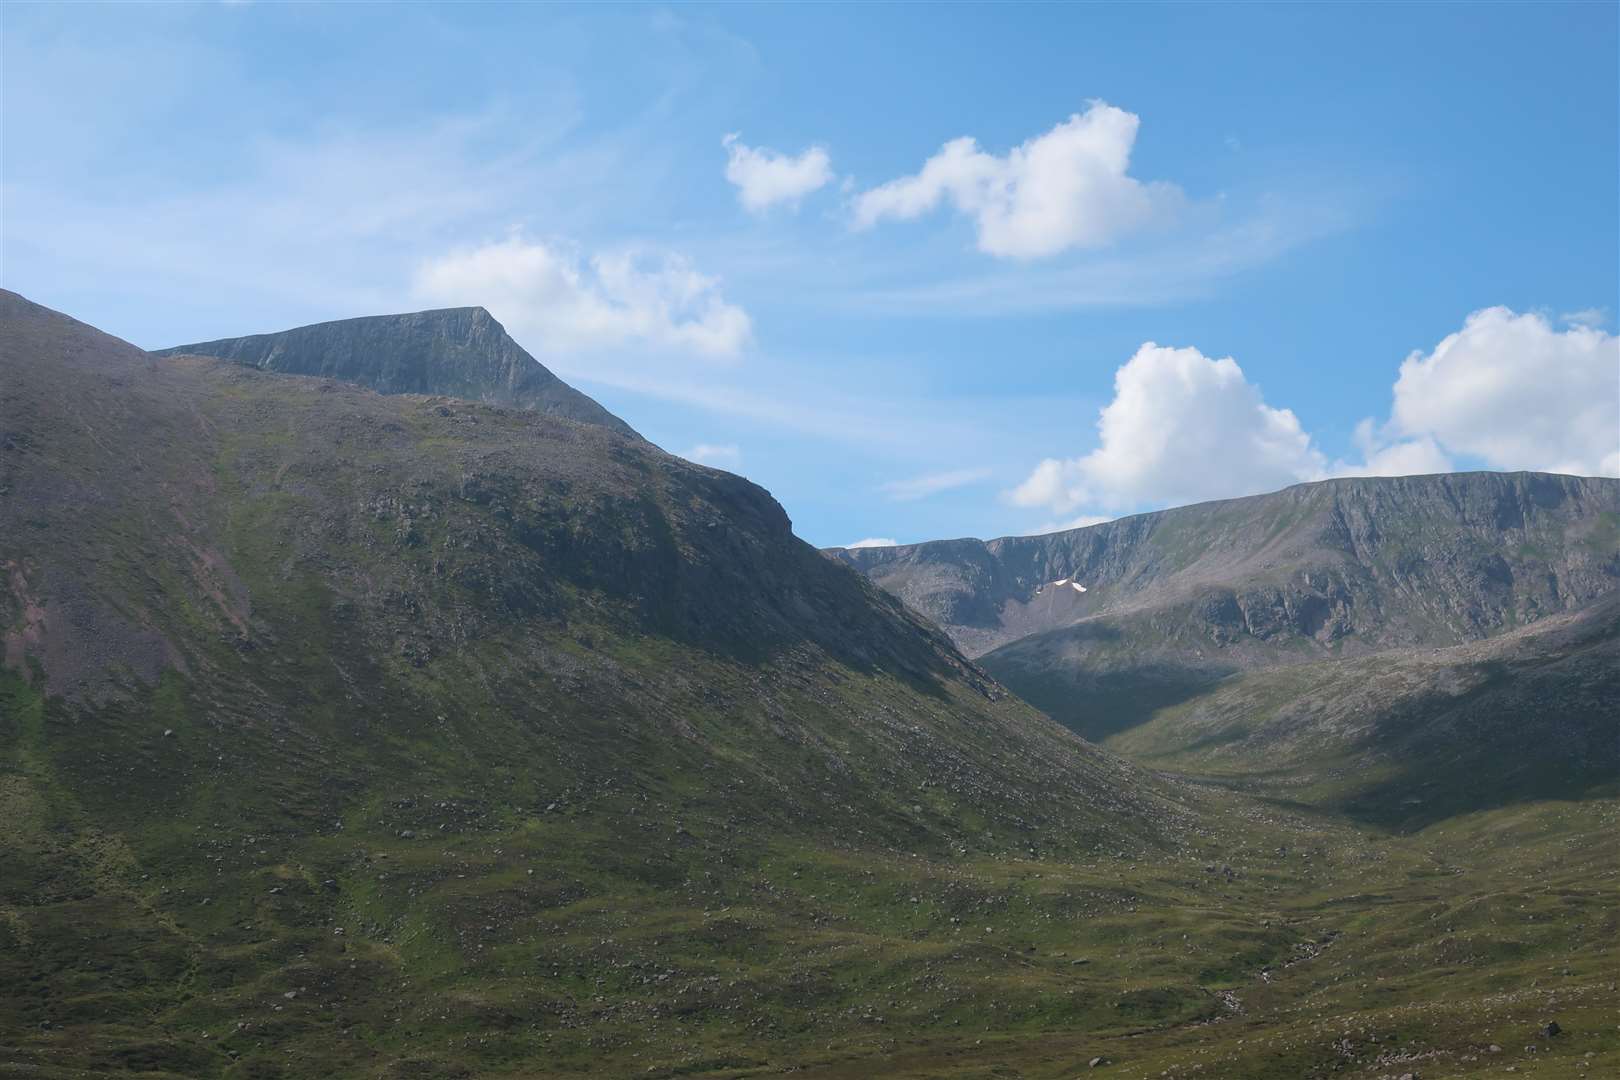 The Sphinx snow patch just about remains (right of centre) while the dominant peak is Sgurr an Lochain Uaine, The Angel's Peak.